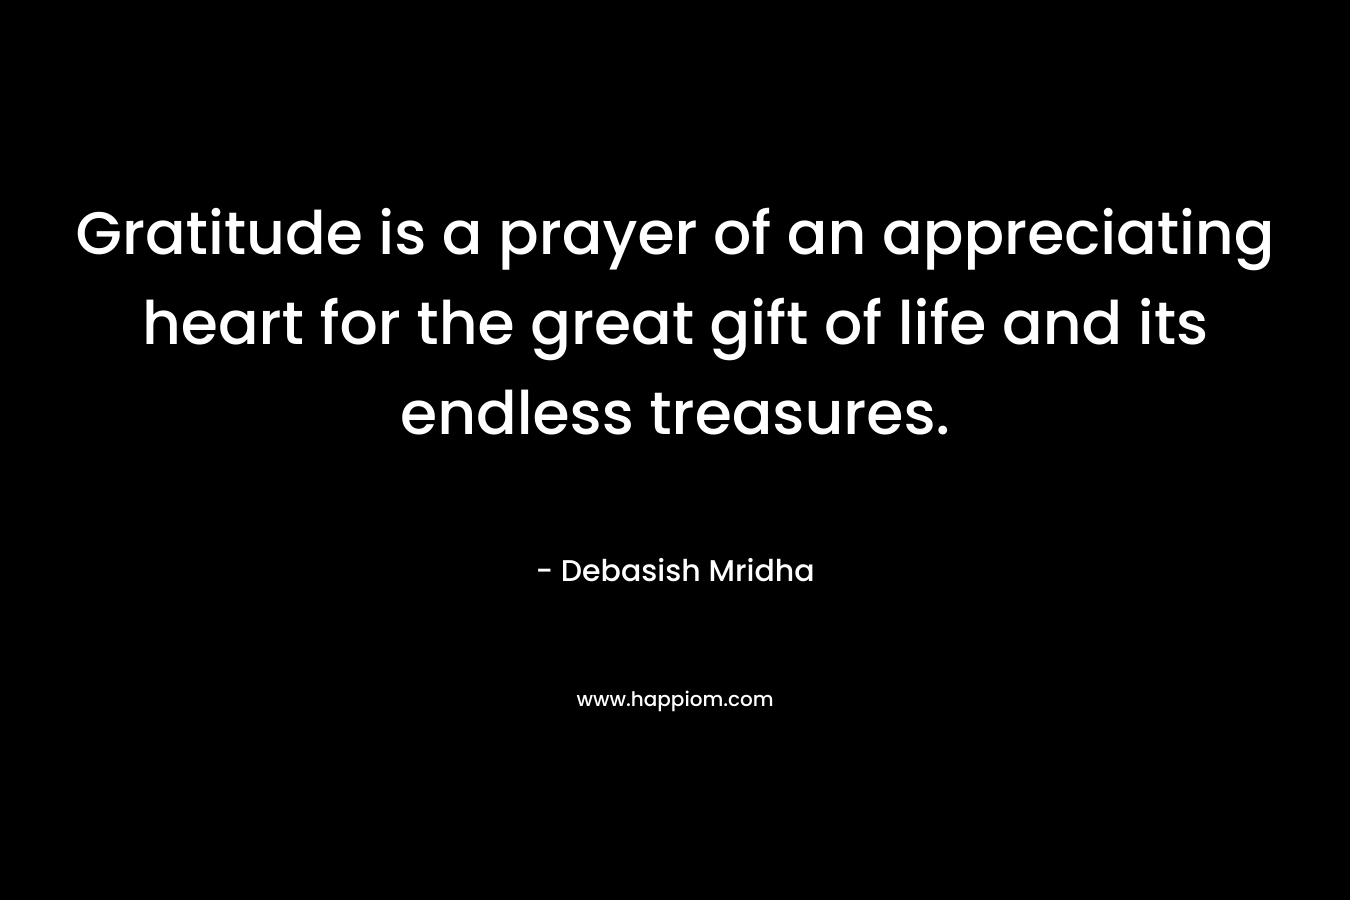 Gratitude is a prayer of an appreciating heart for the great gift of life and its endless treasures.